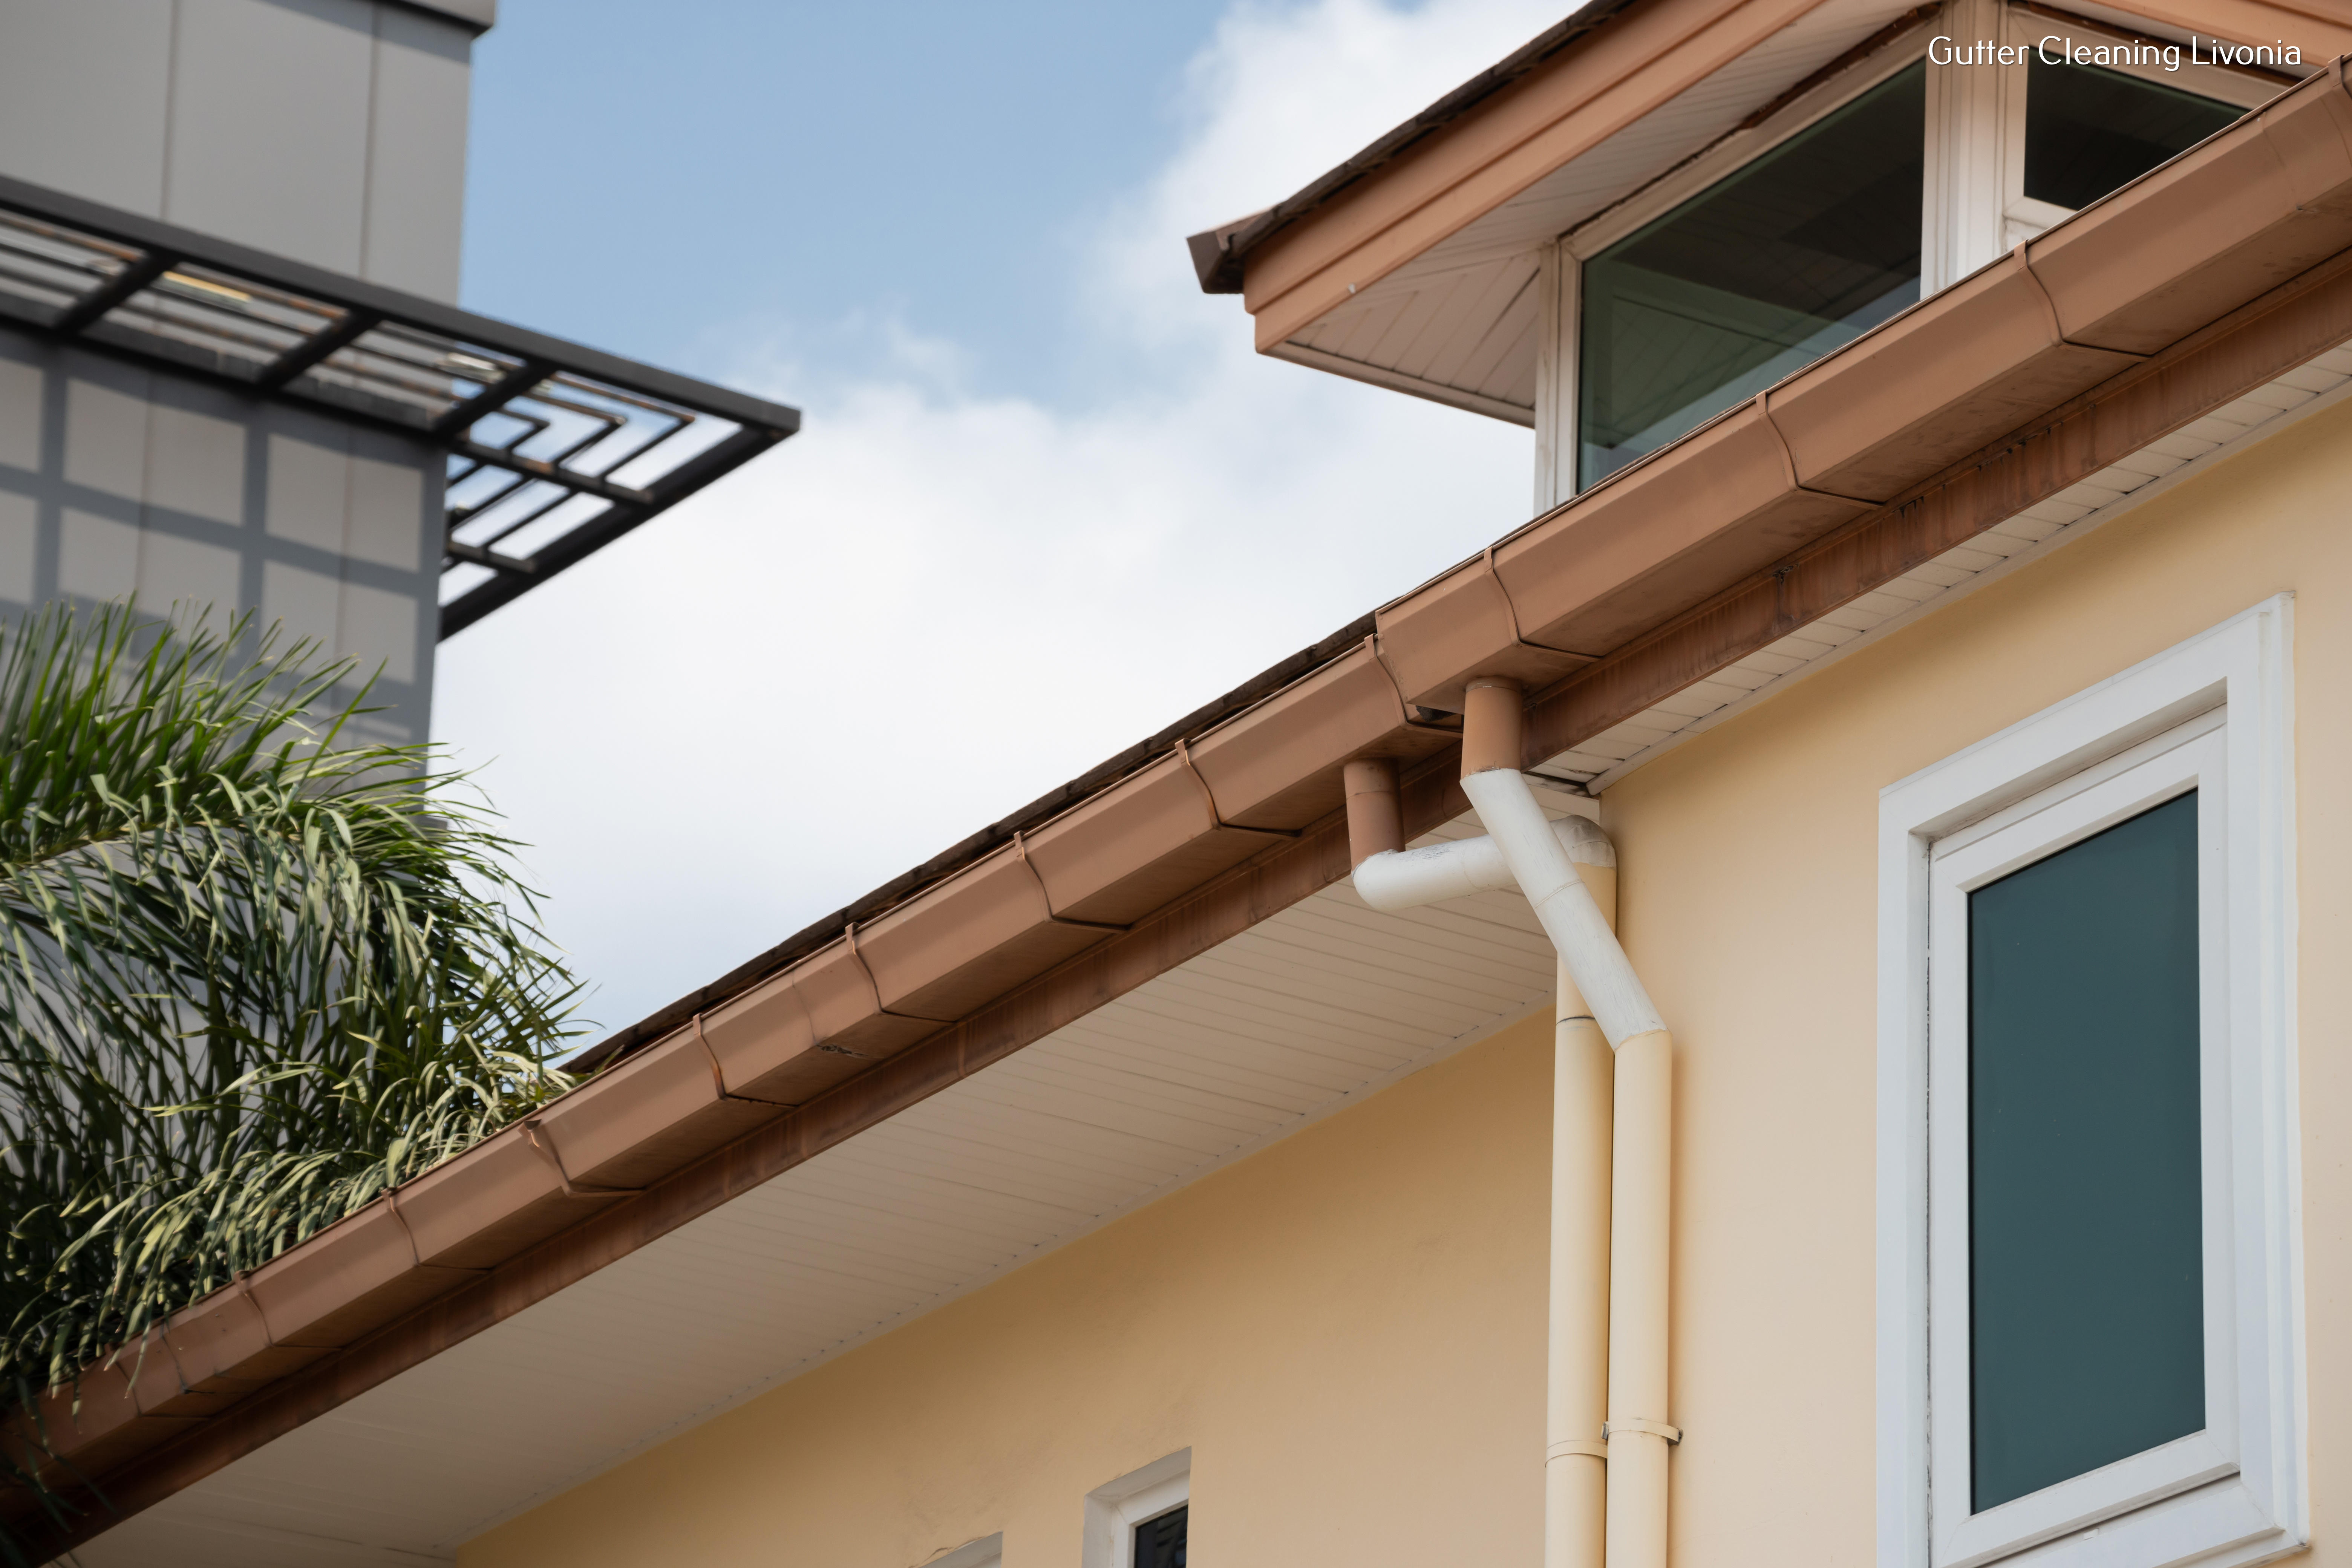 Gutter Guard Midwest Advises on the Importance of Gutter Maintenance